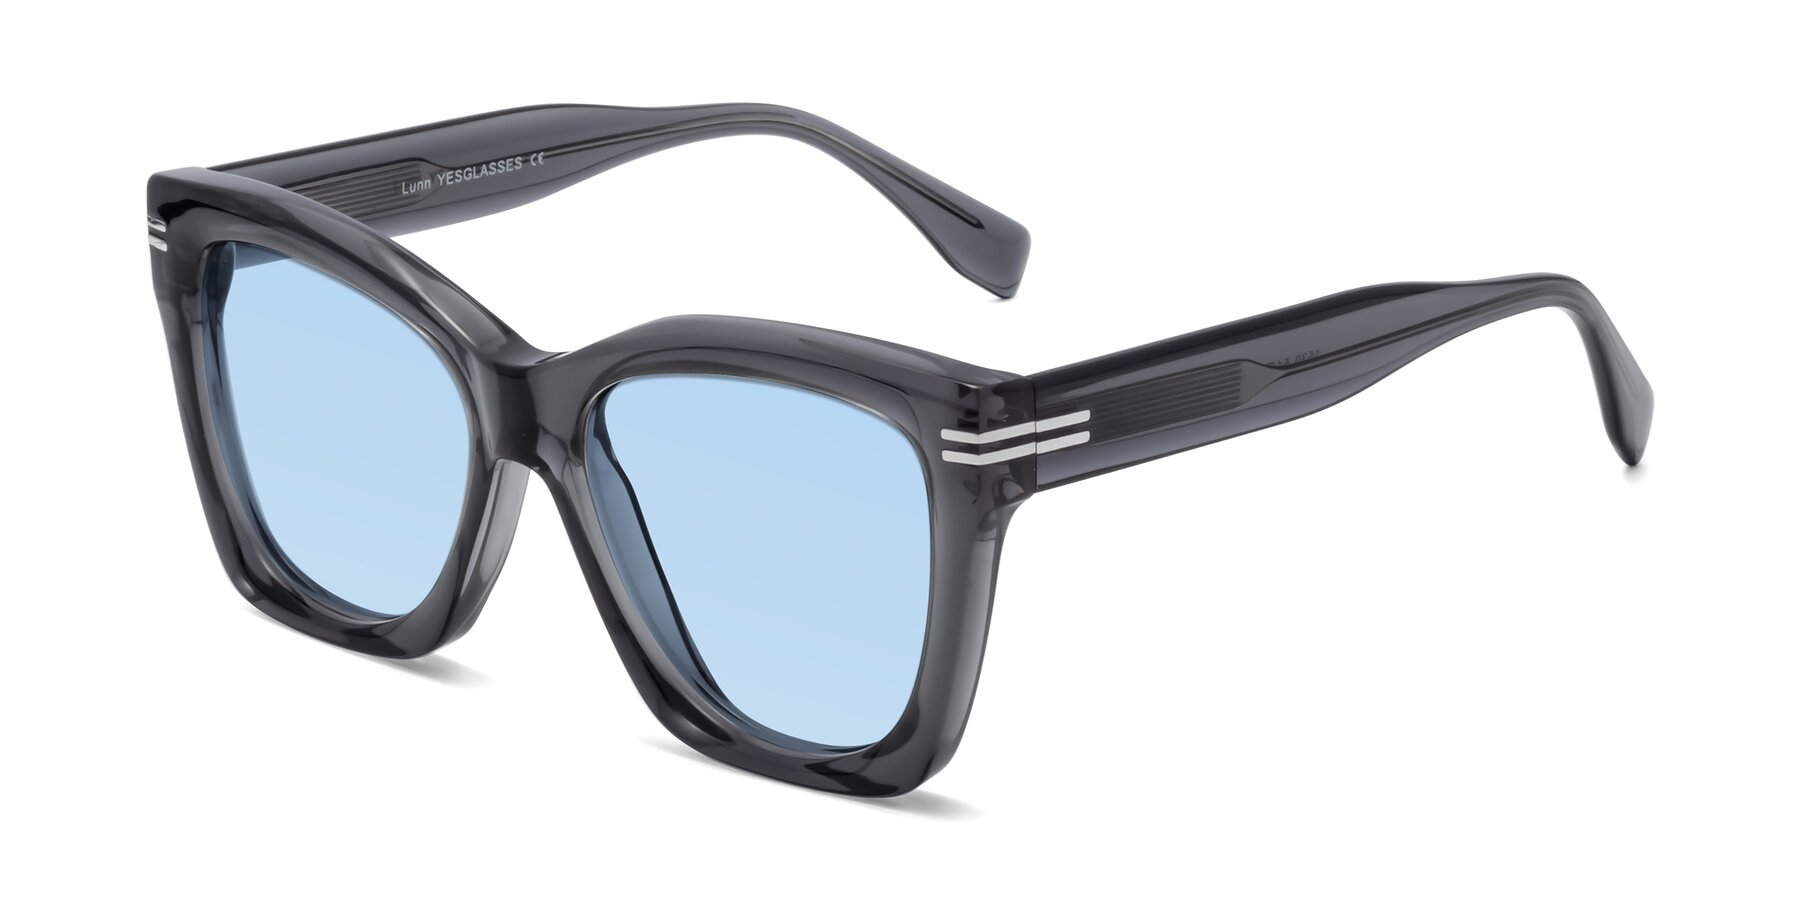 Angle of Lunn in Translucent Gray with Light Blue Tinted Lenses